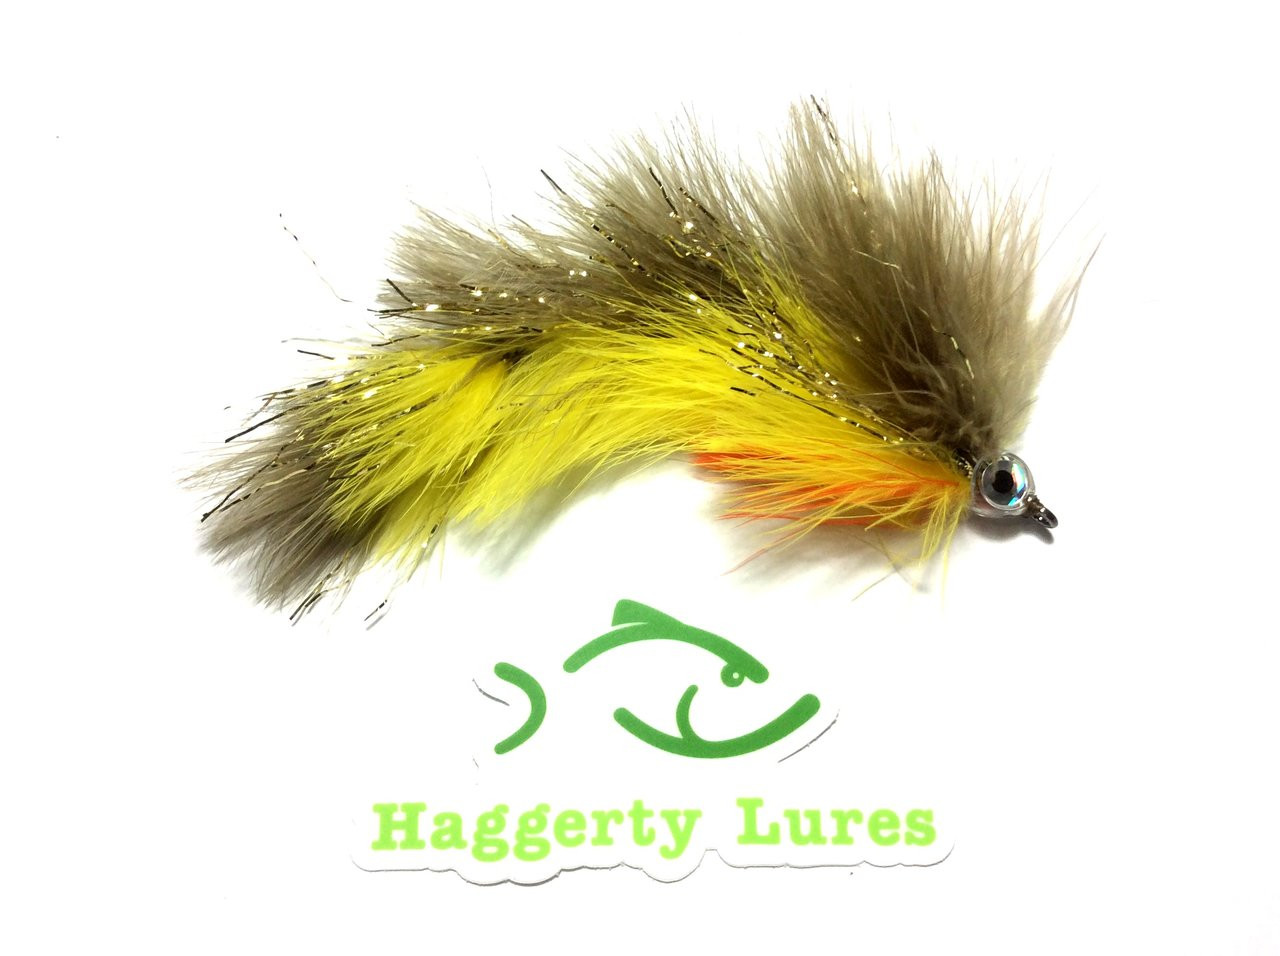 Marabou Jig - Signature Chartreuse and White - Round Head Fishing Lure -  Haggerty Lures